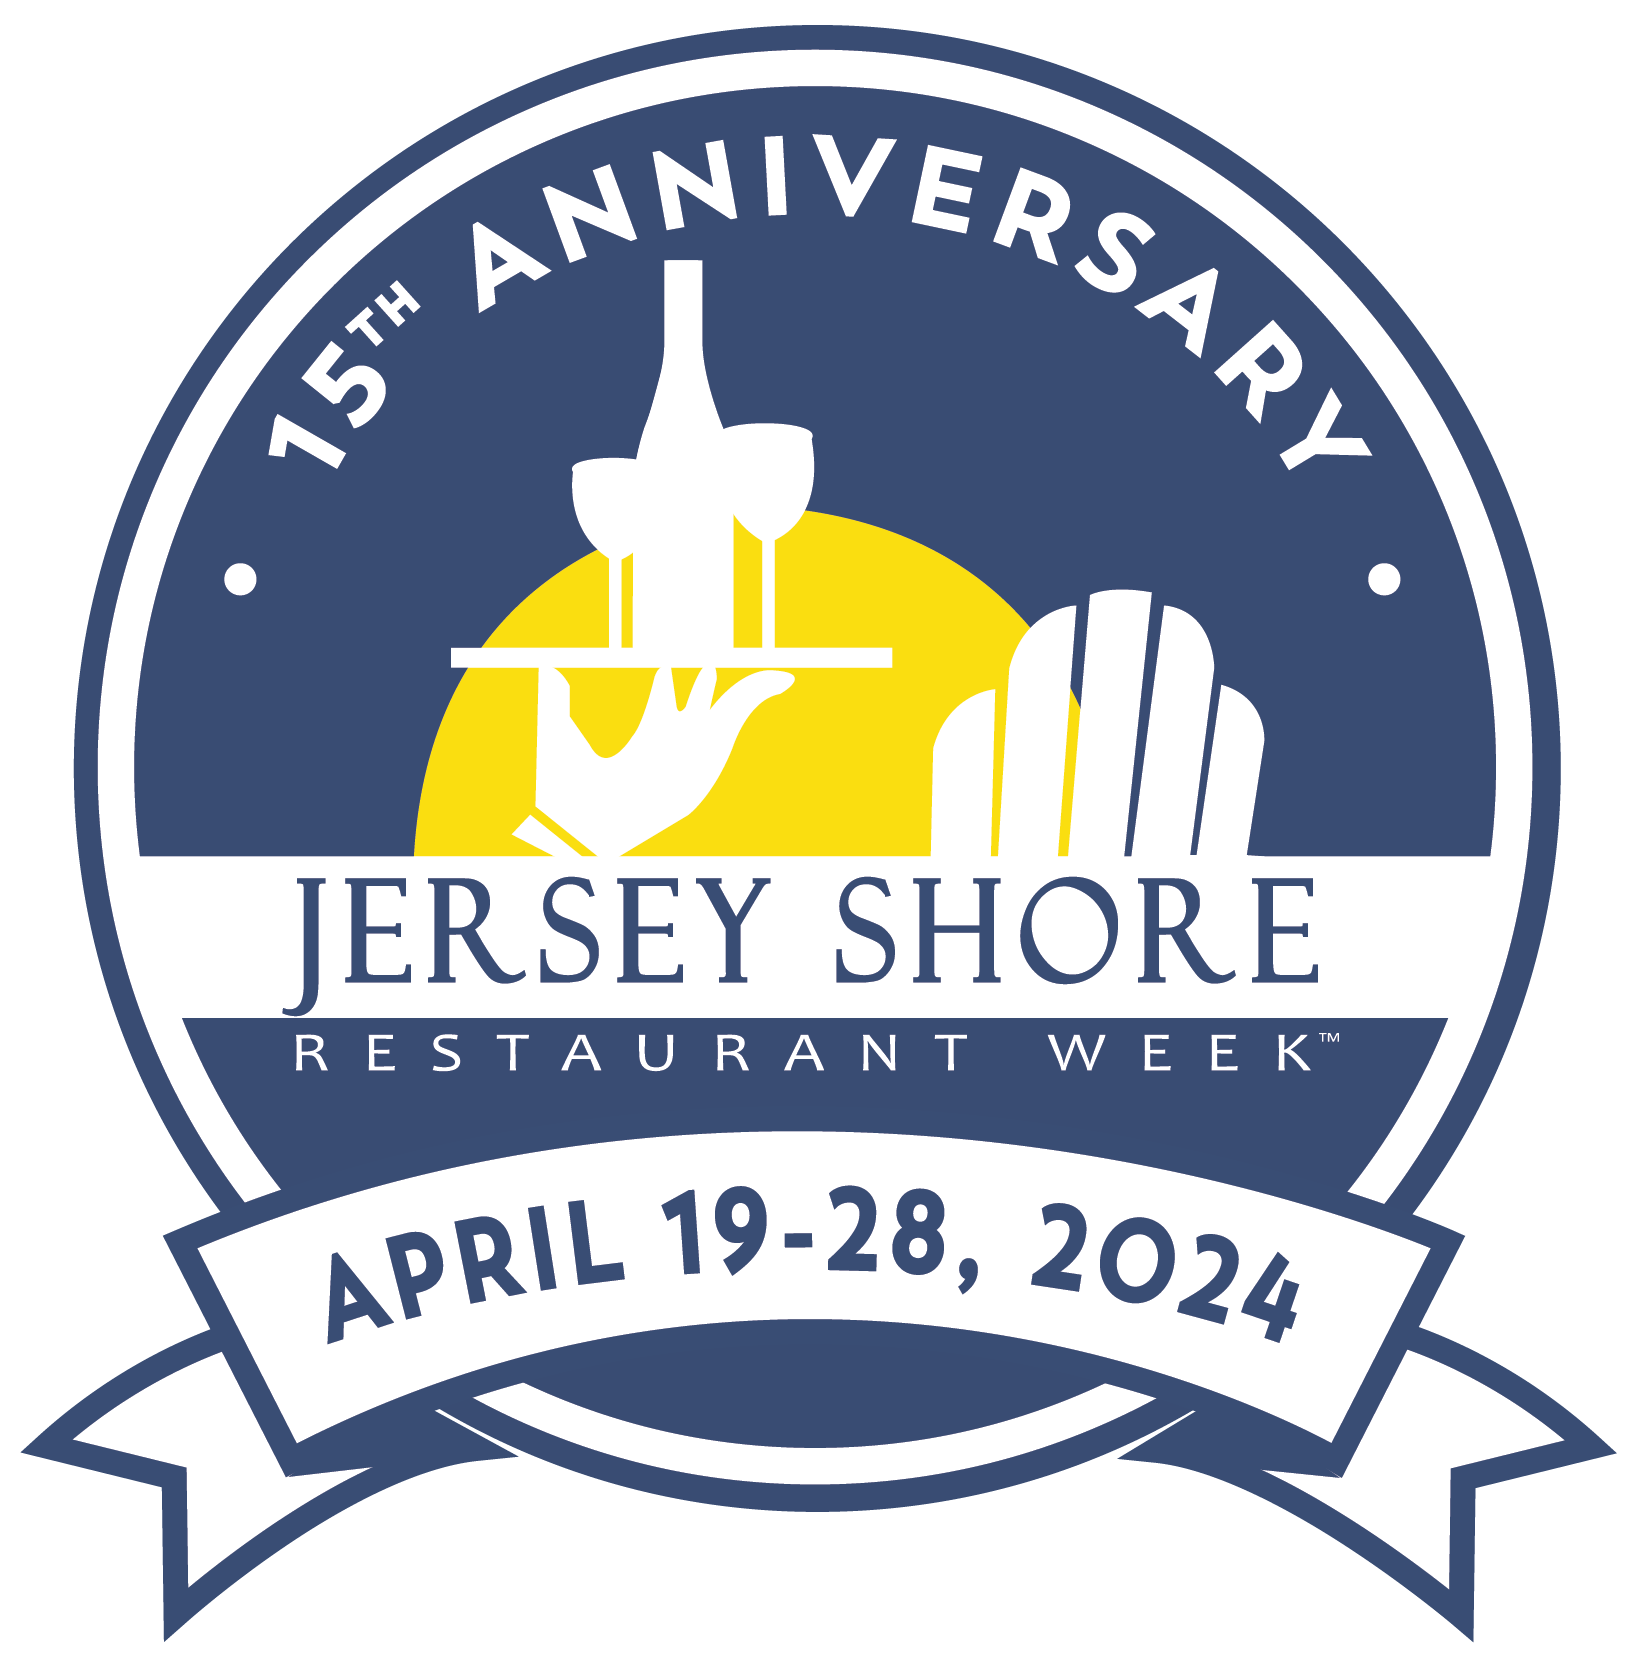 15th Anniversary - Jersey Shore Restaurant Week. April 19th - 28th, 2024.